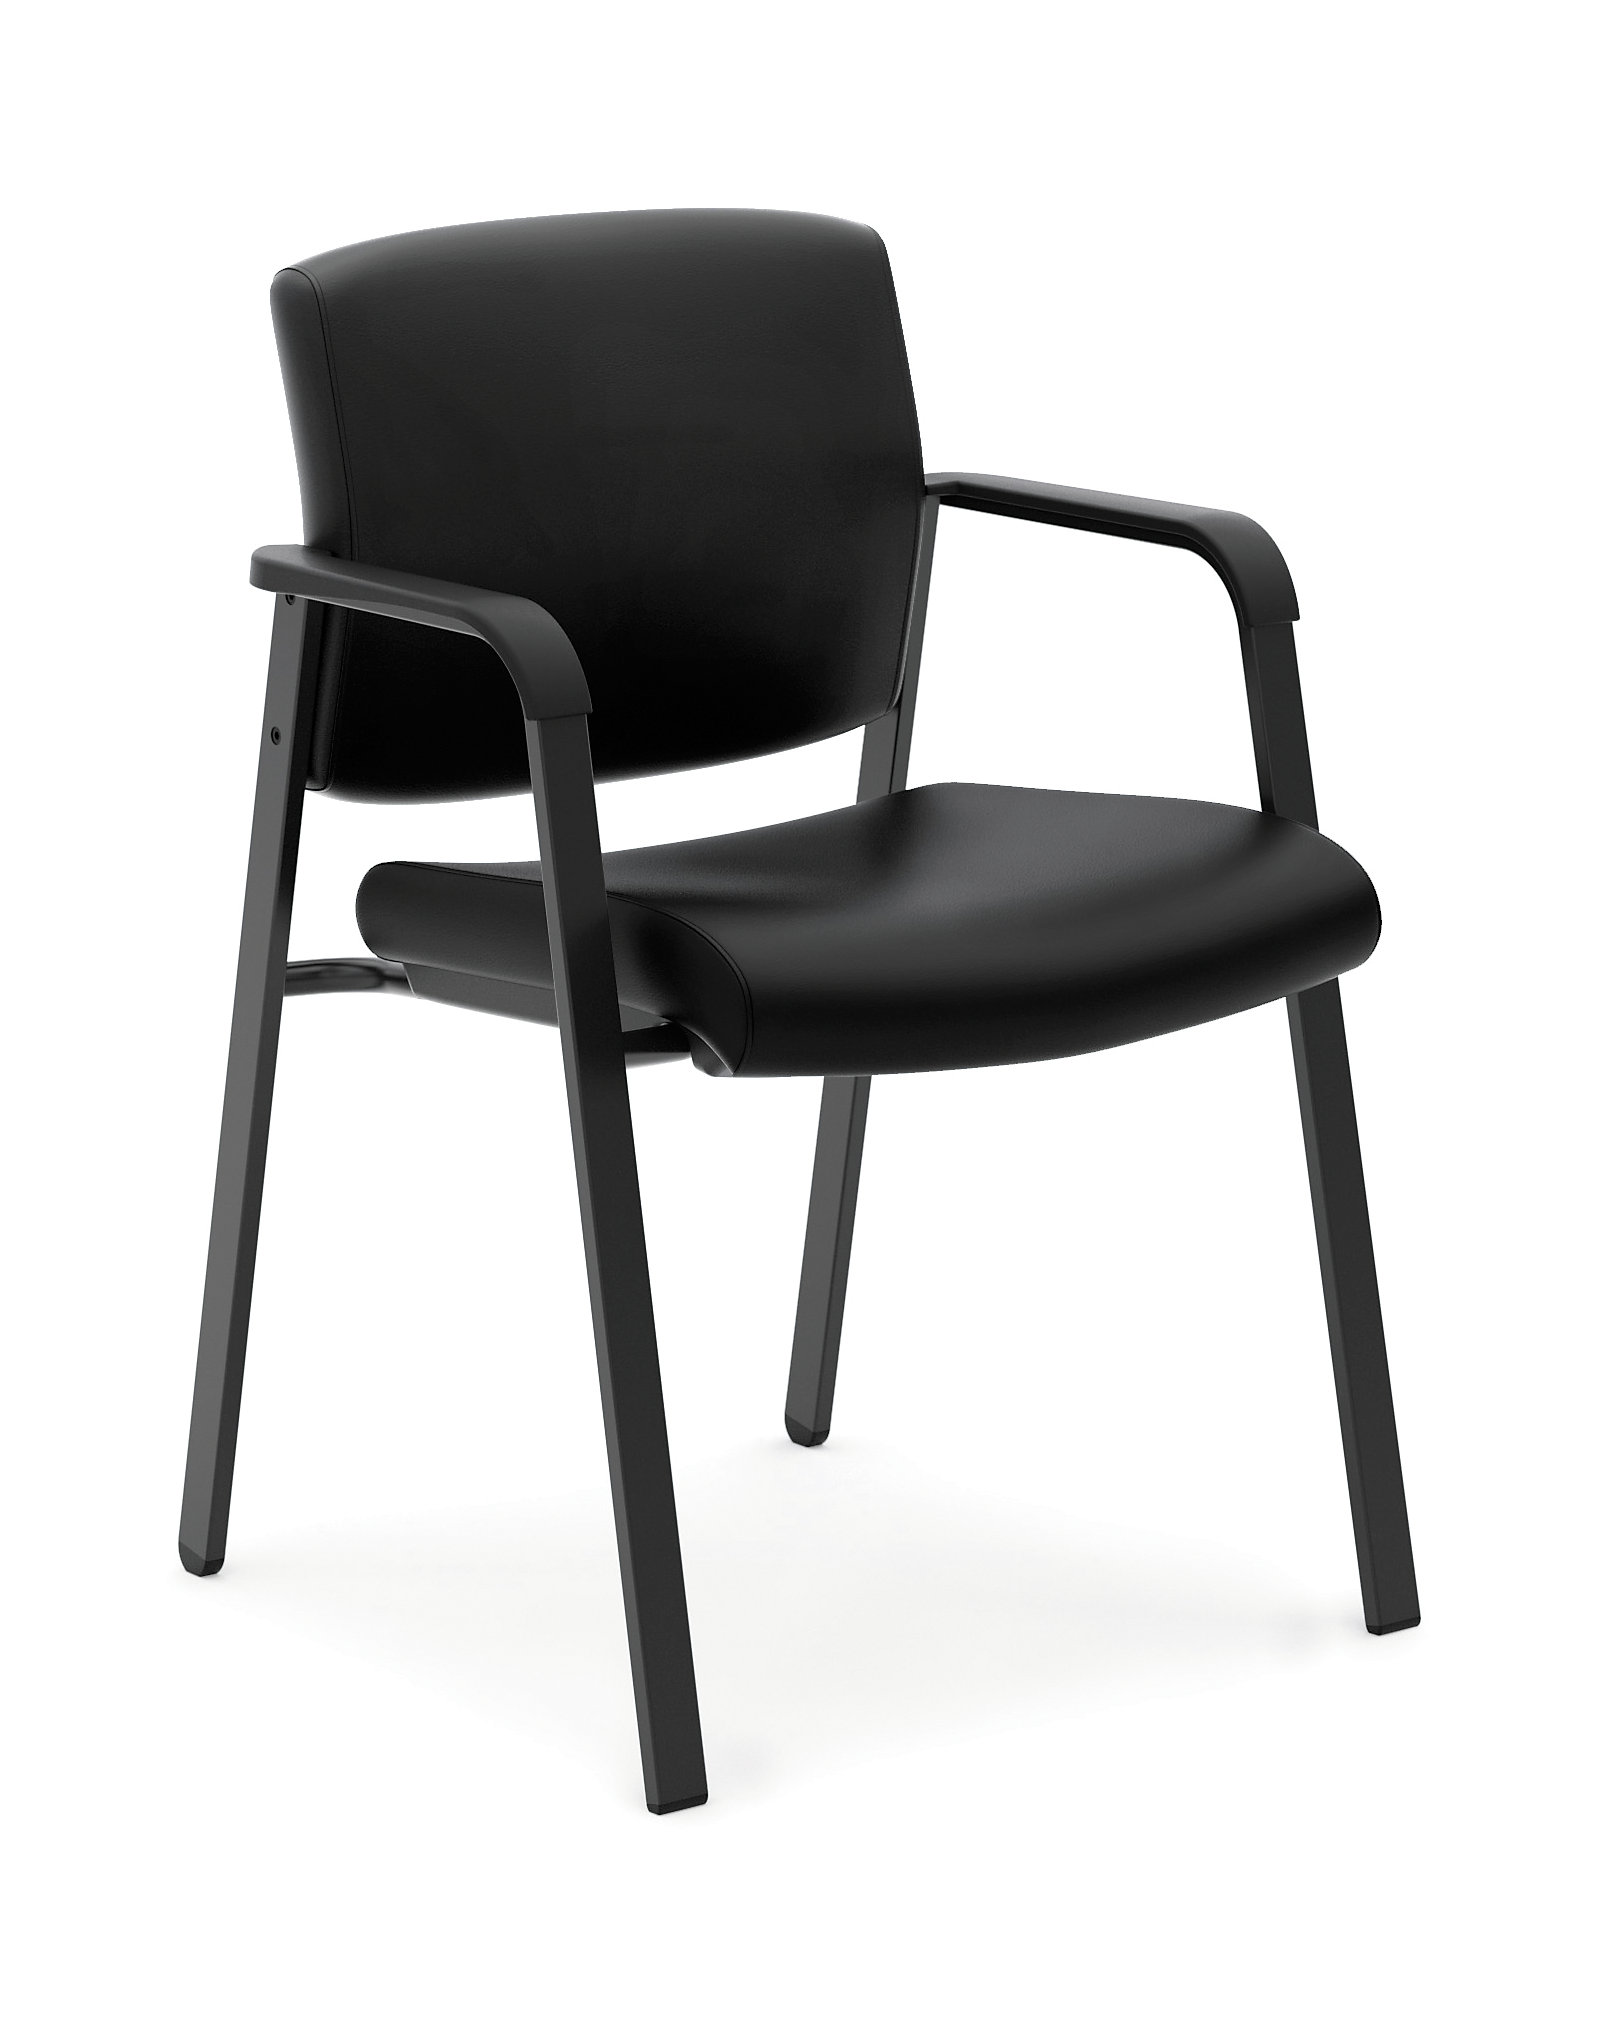 Executive Guest Chair-HVL605-image